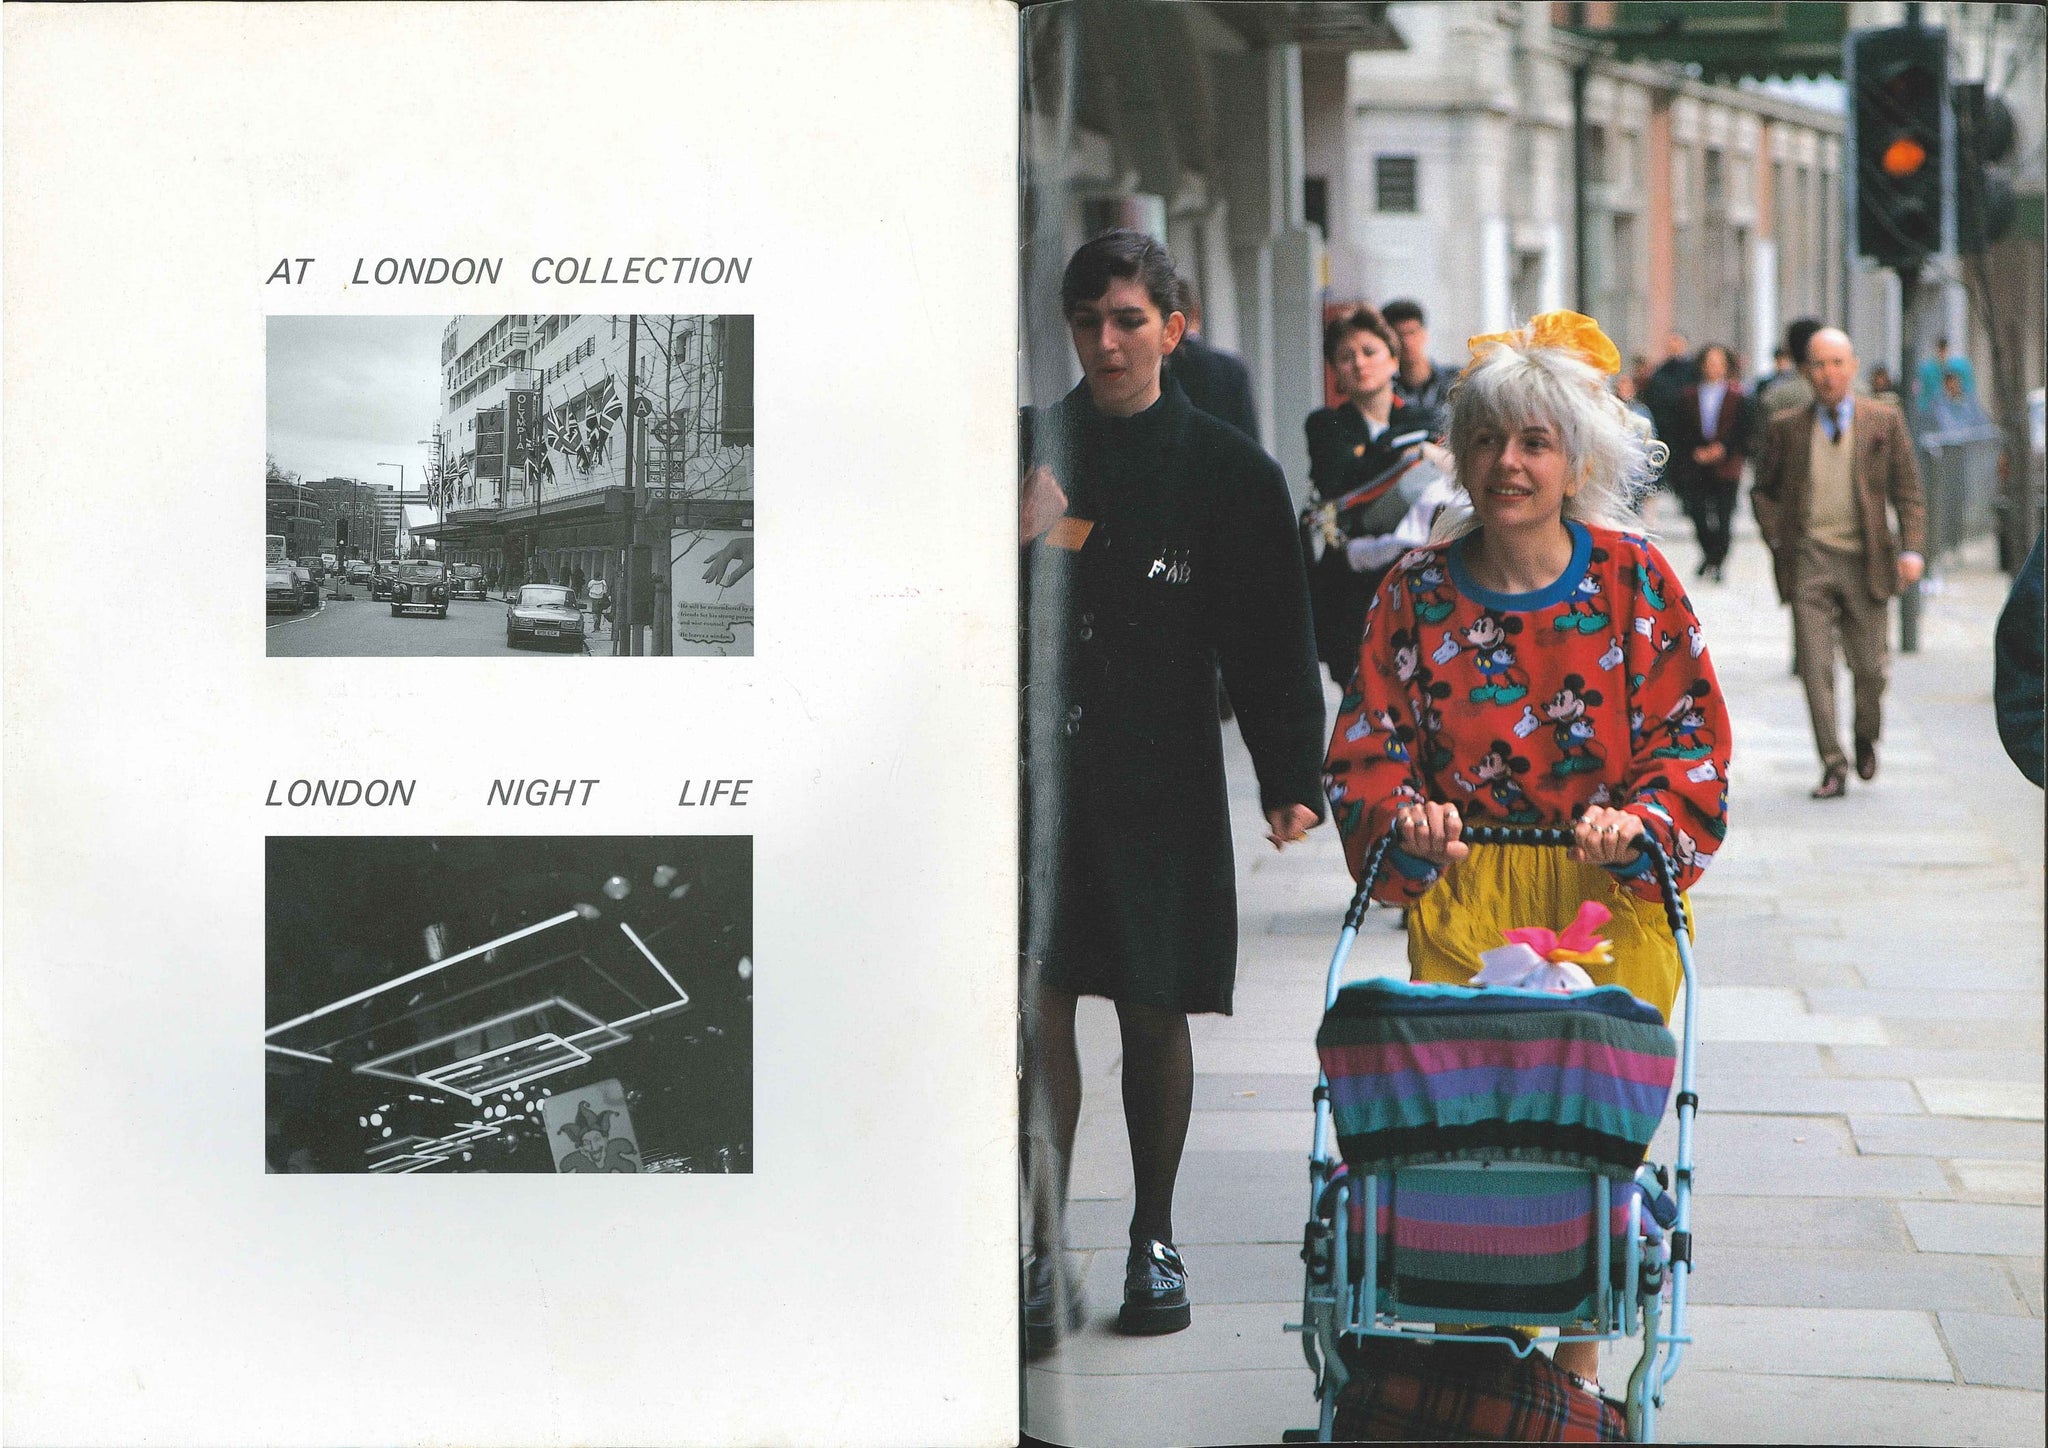 STREET magazine no. 16 / july 1988 / london collections and night life